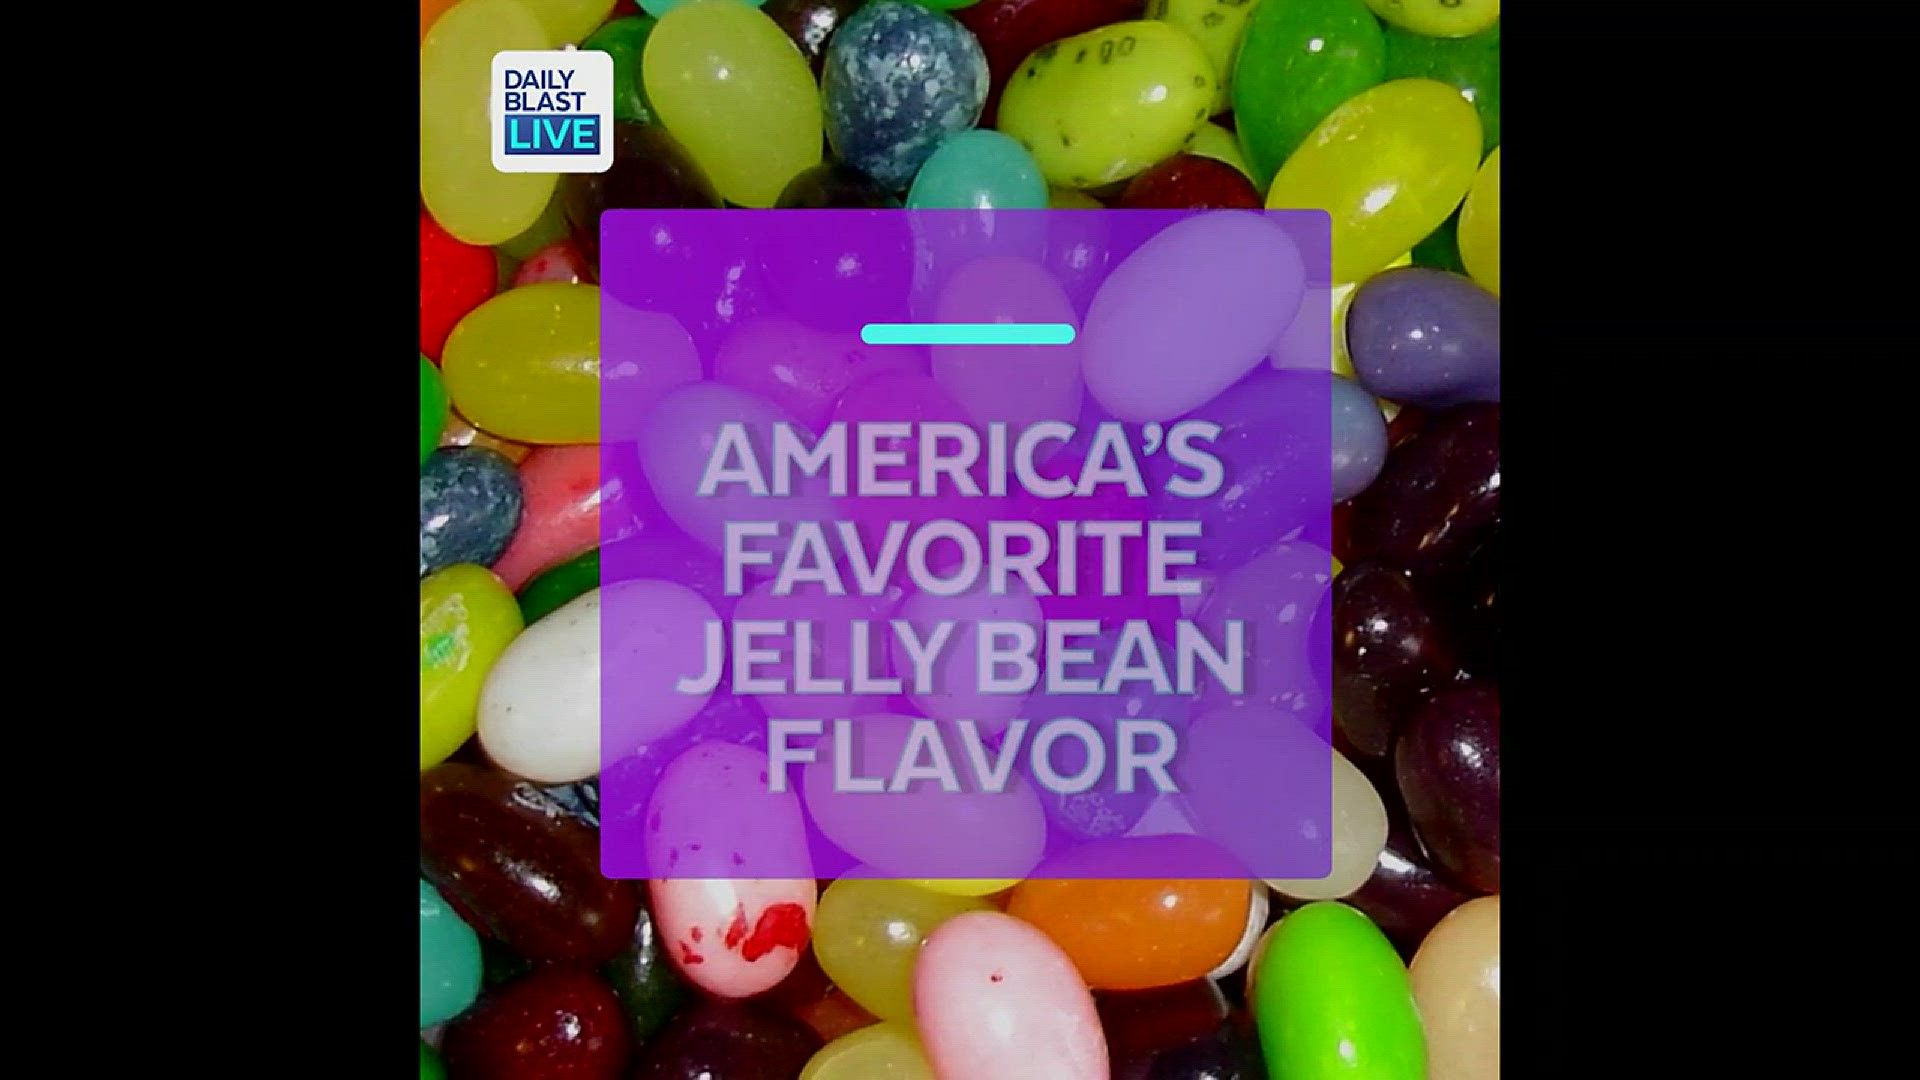 What is your favorite jelly bean flavor?